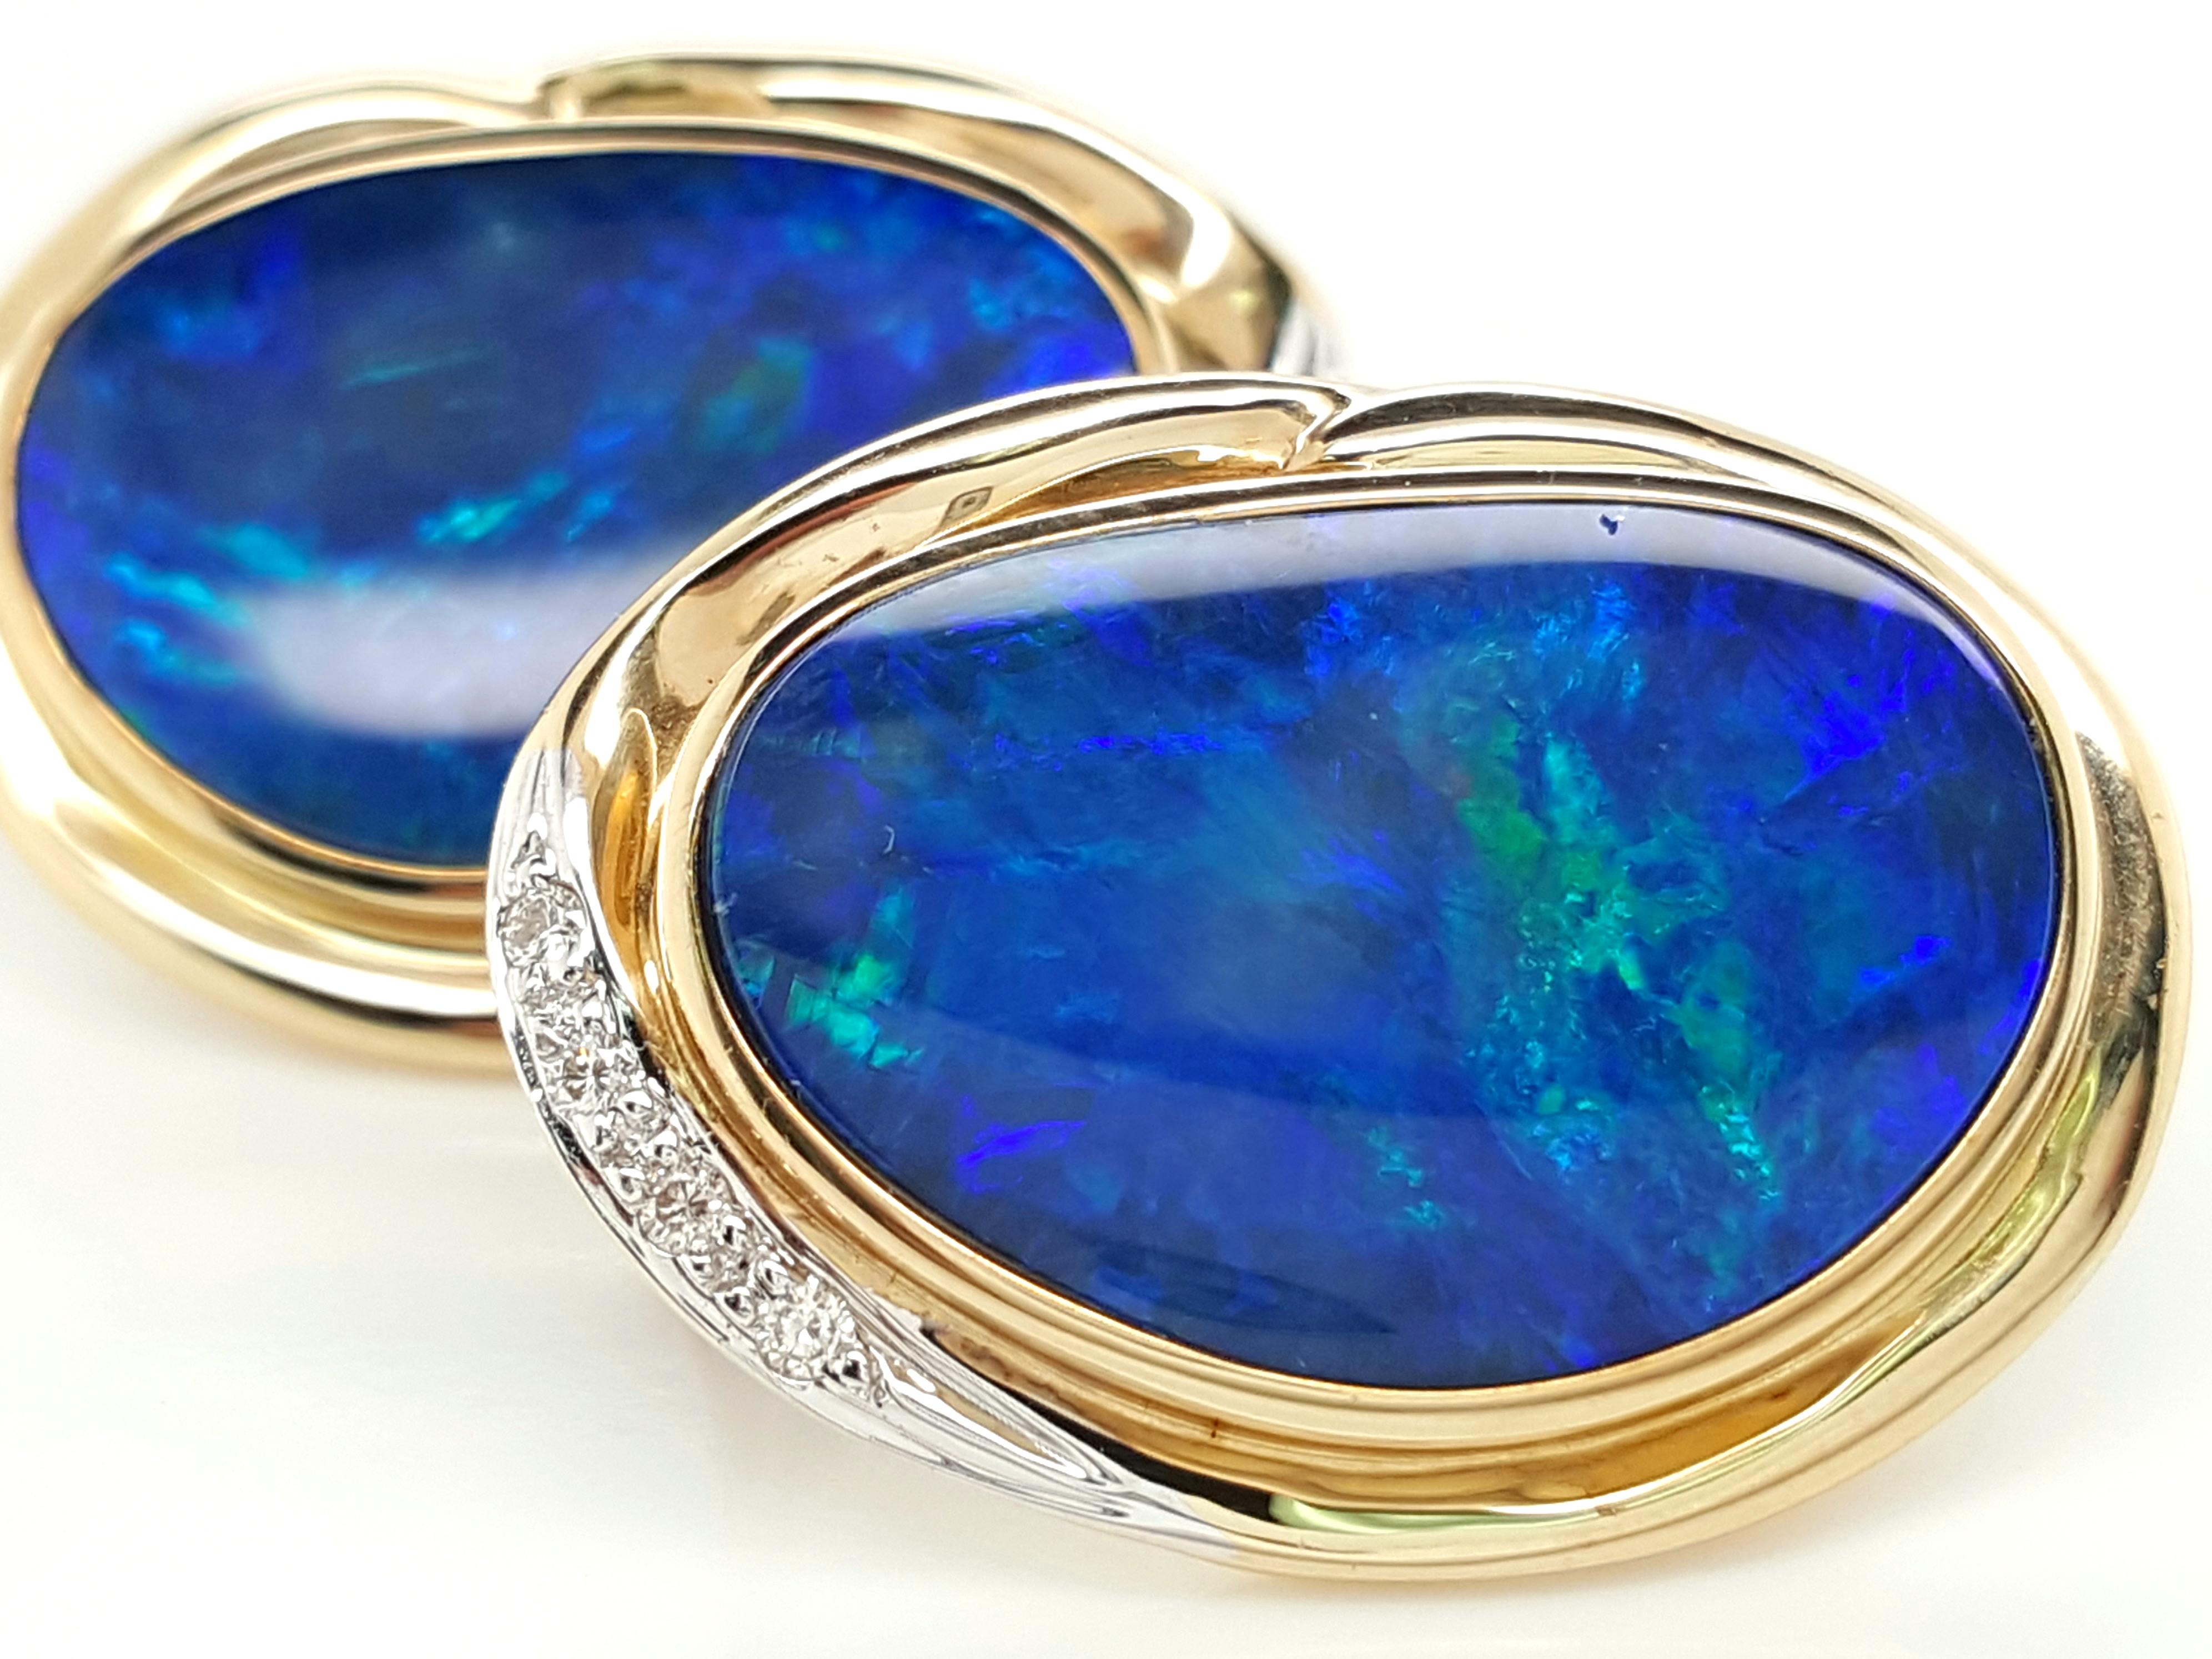 These large sized opal earrings look as if they walked directly out of the 80's. The stunning and complimentary look of natural blue opals set in yellow gold is such a fun vintage style. Each earring centers around a big flat oval natural opal